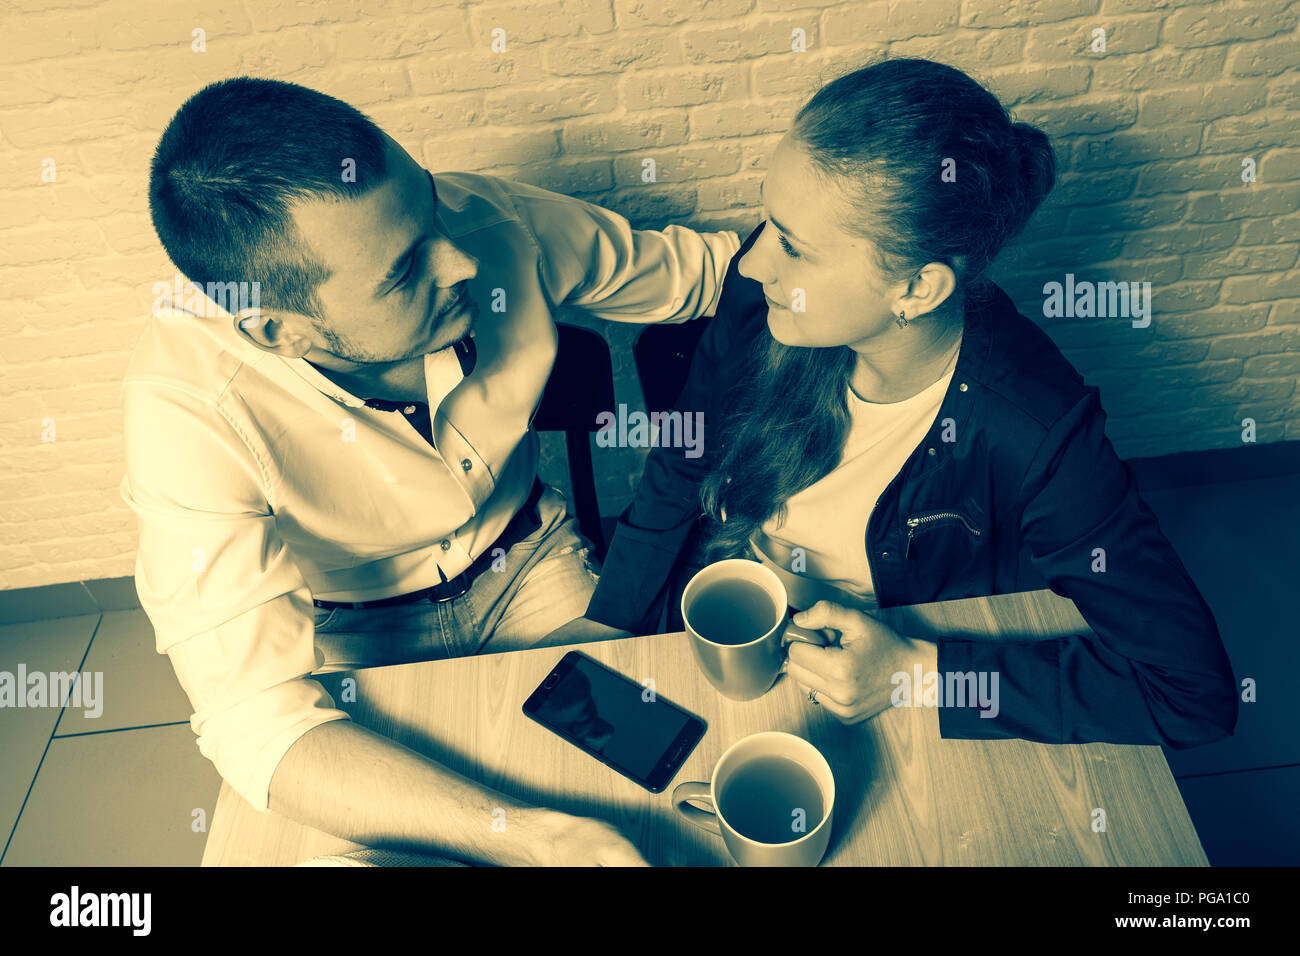 The girl and the guy in cafe, at a table, talk. The guy and the girl with love and tenderness look at each other. On a table there is a tea and phone. Stock Photo